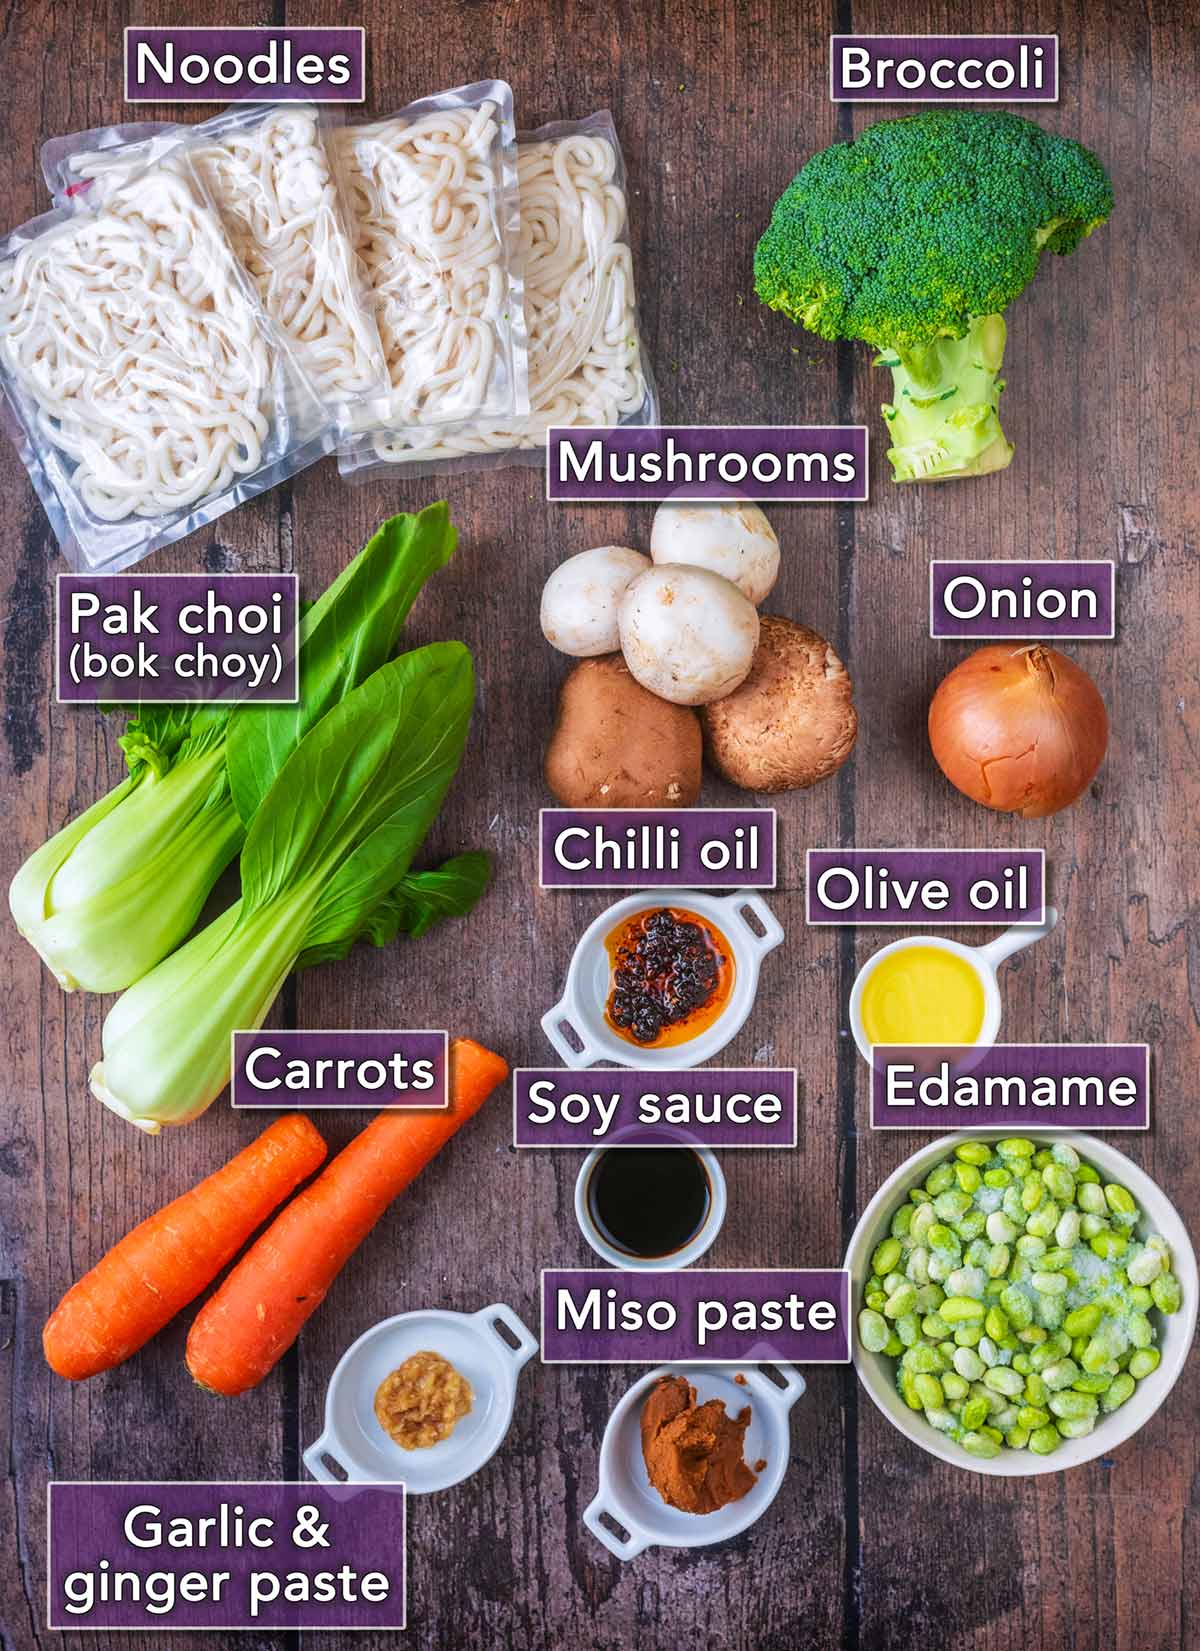 All the ingredients needed to make this recipe each with a text overlay label.